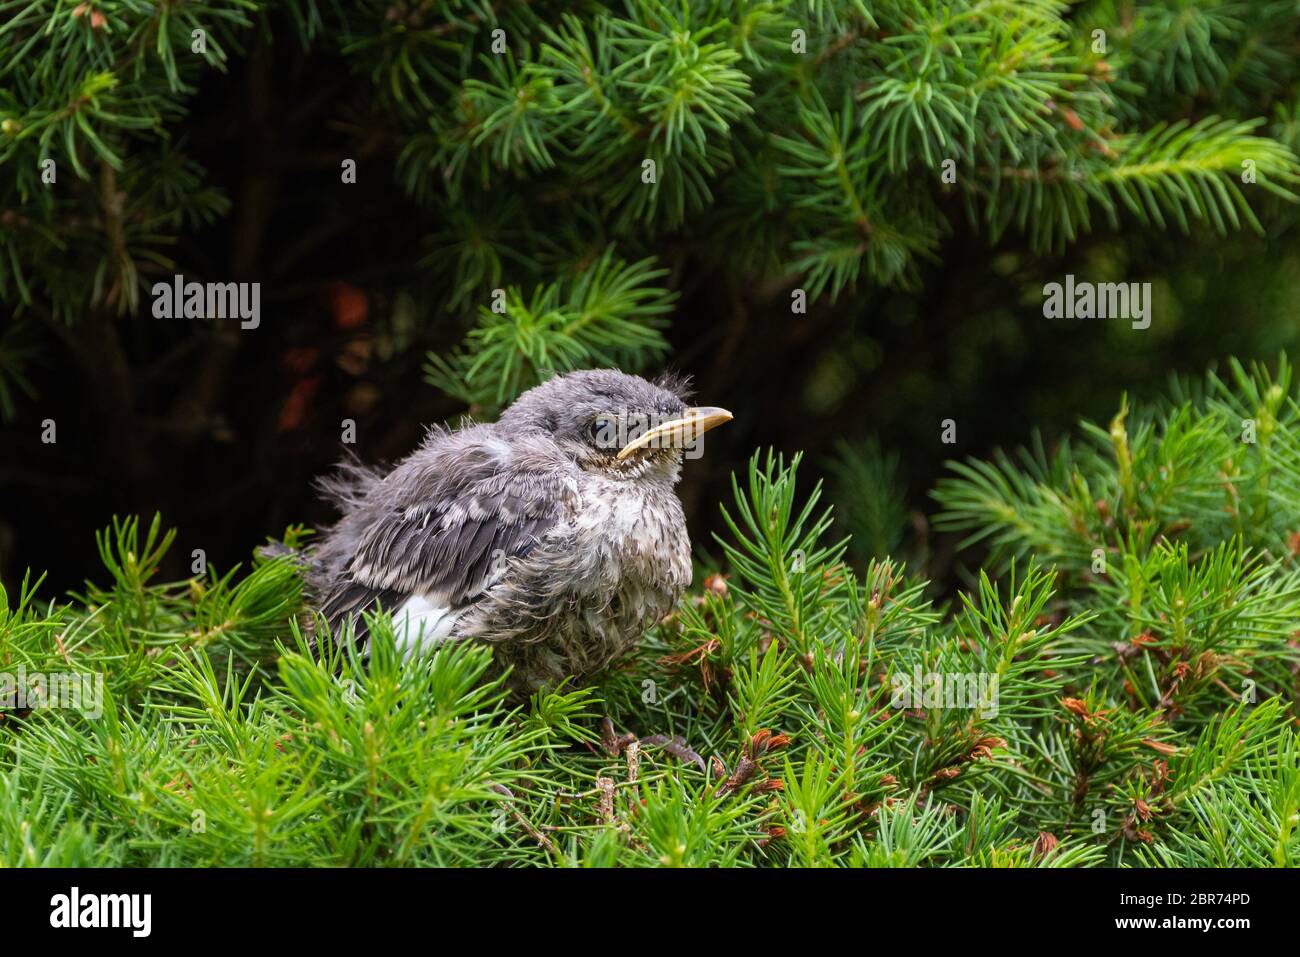 A young Northern Mockingbird fledgling sits perched on a pine. Stock Photo